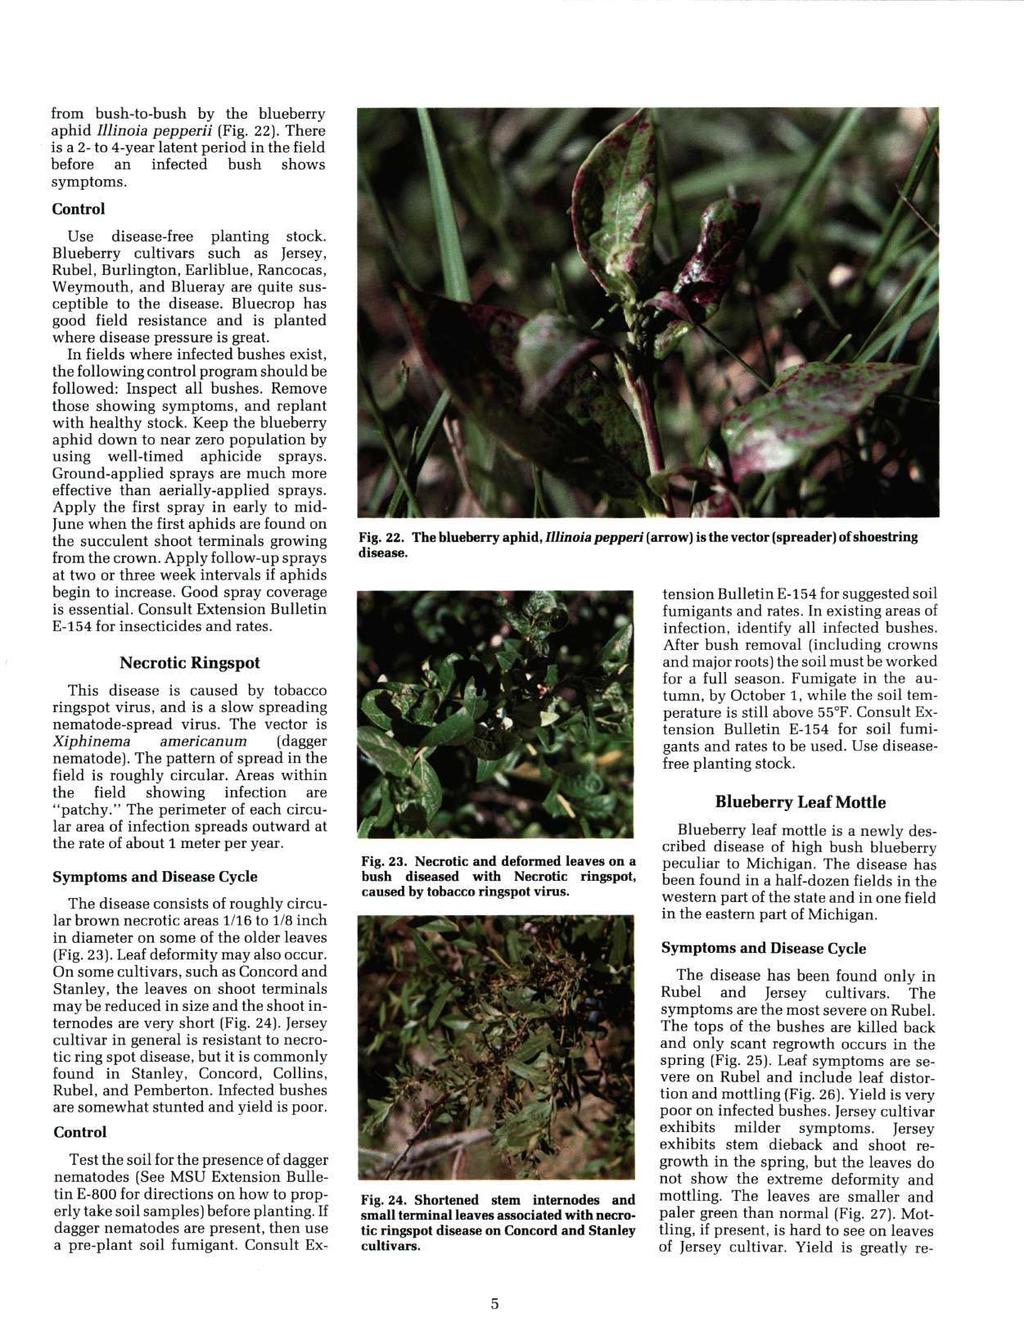 from bush-to-bush by the blueberry aphid Illinoia pepperii (Fig. 22). There is a 2- to 4-year latent period in the field before an infected bush shows symptoms. Use disease-free planting stock.